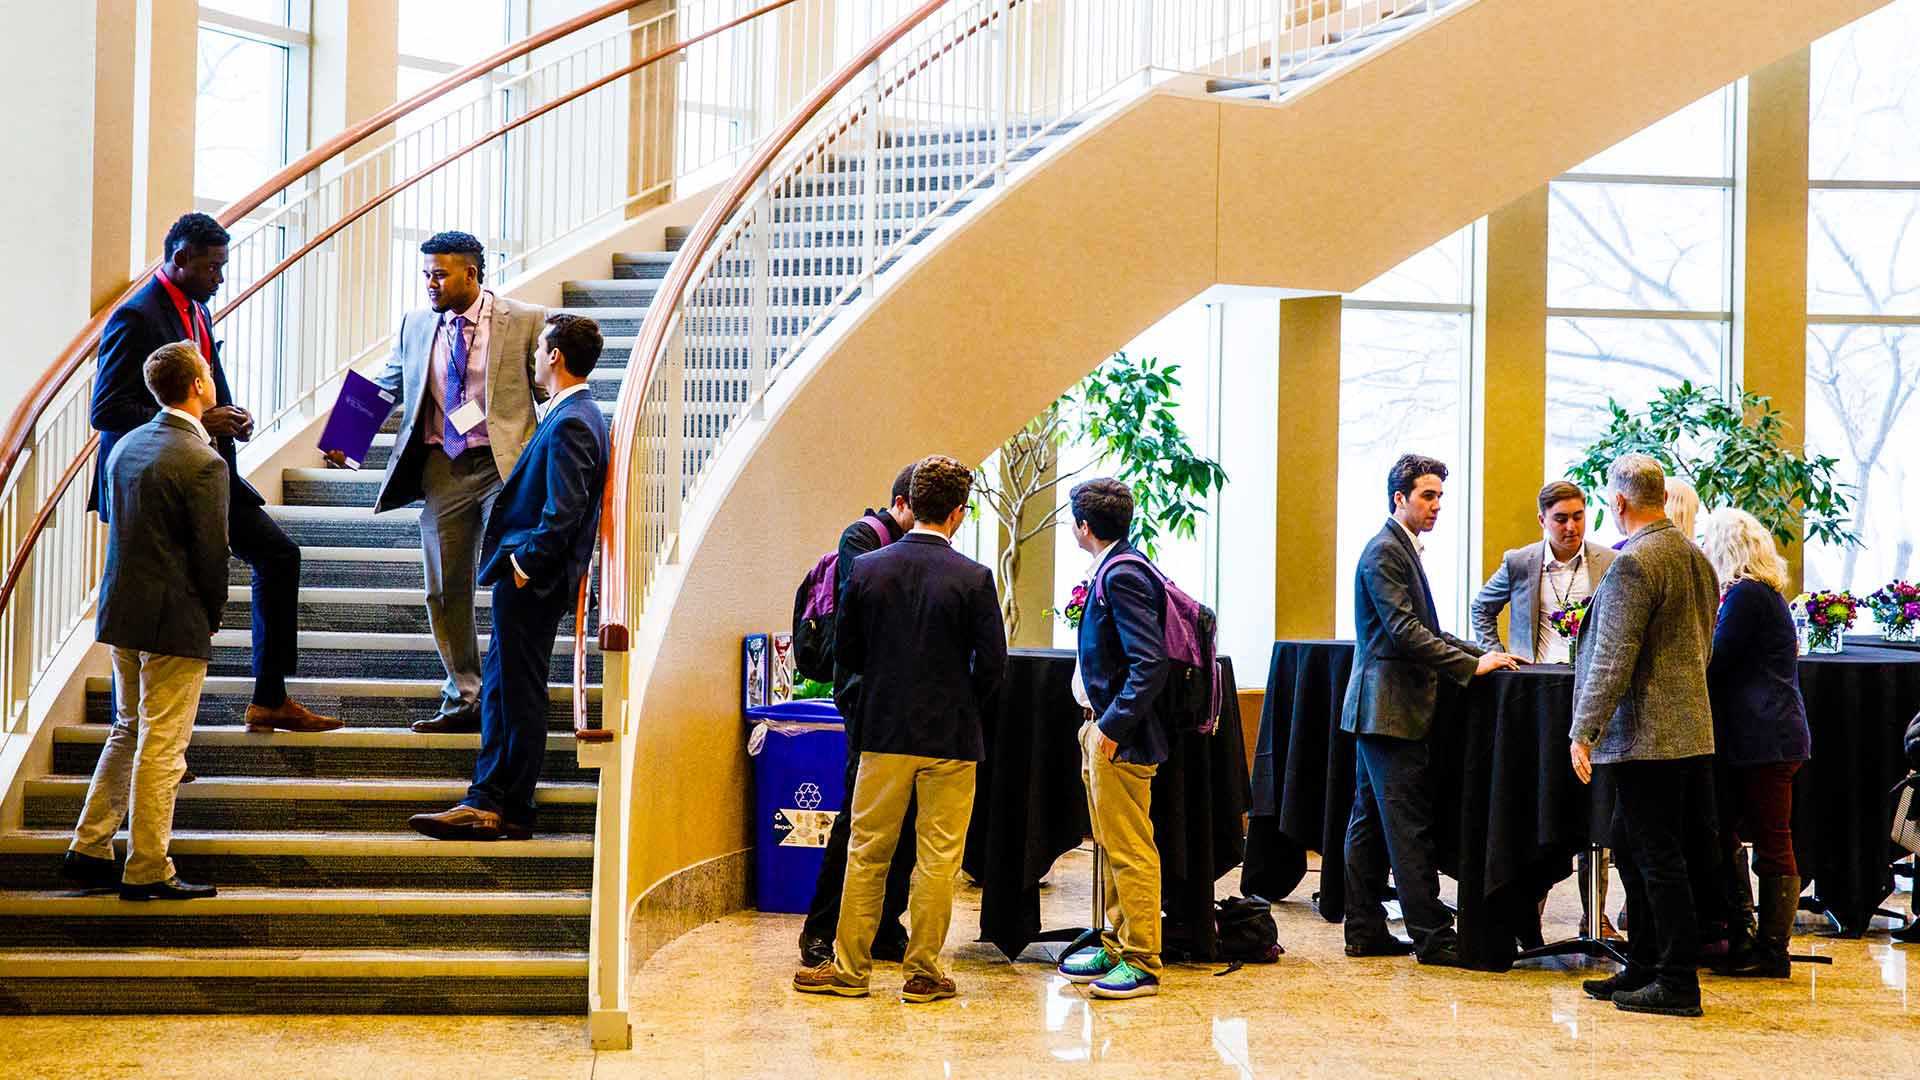 Guests converse during an event held in the Schulze Hall atrium.